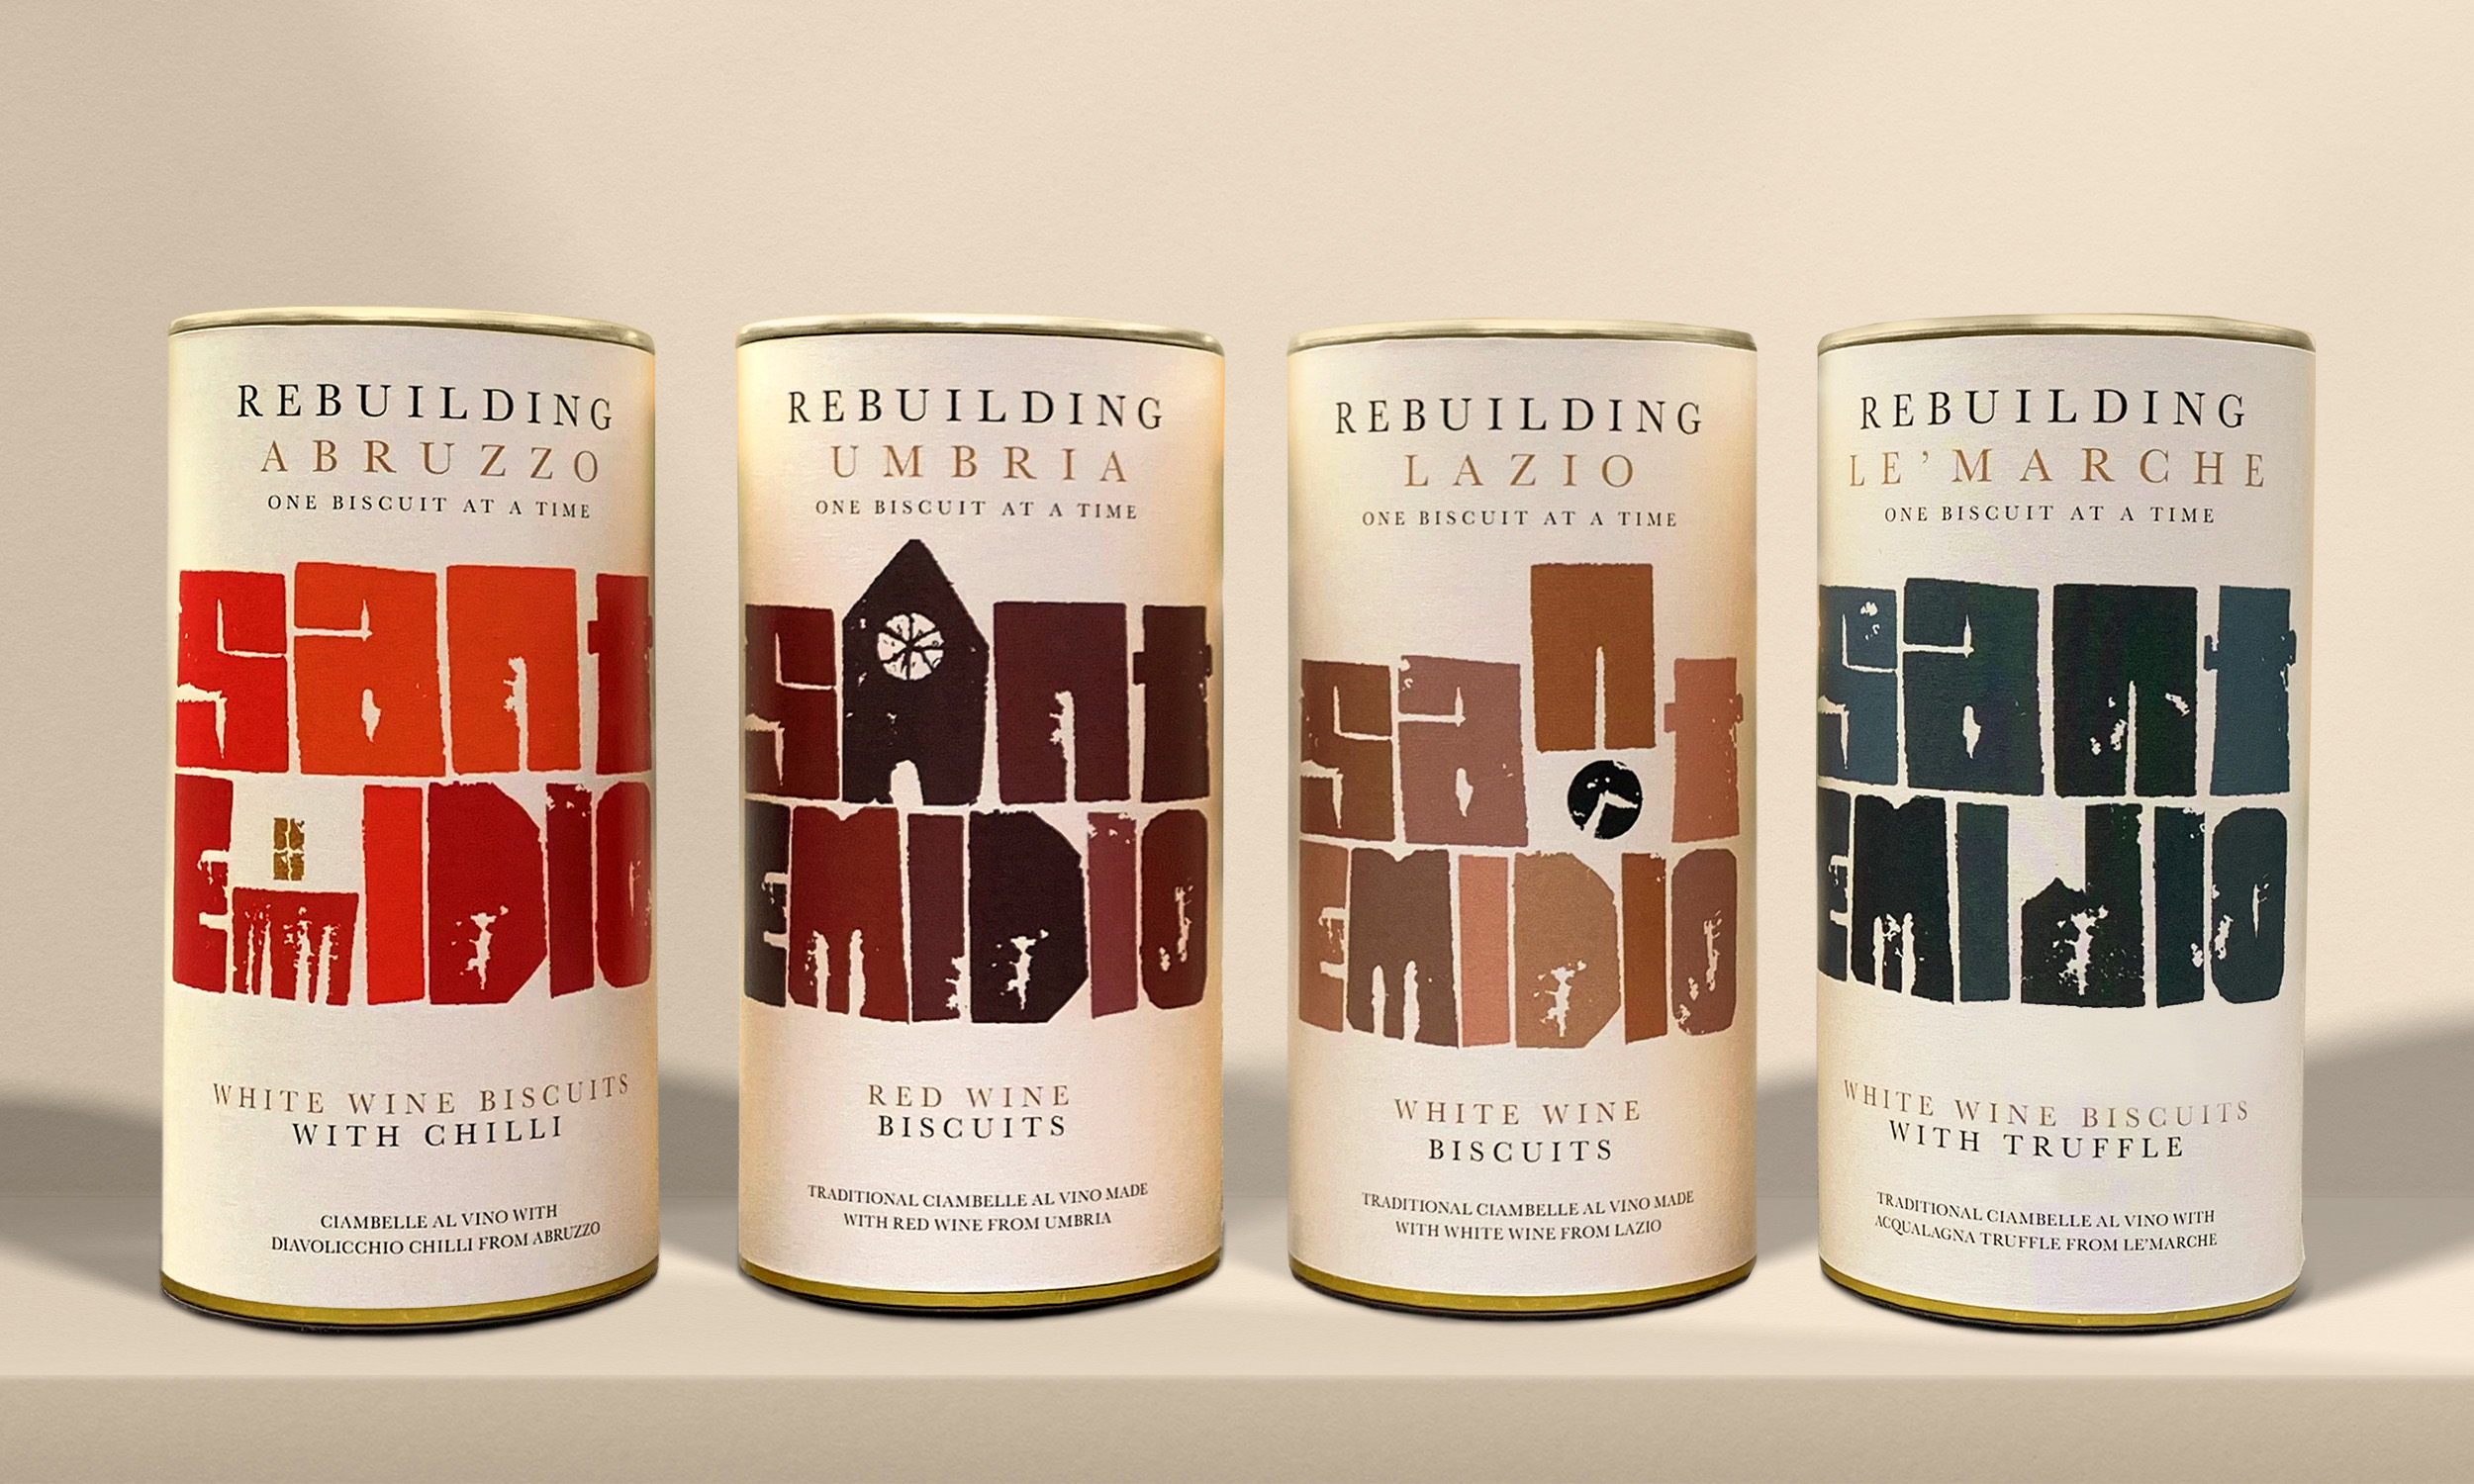 Mock up of Sant Emilio branding on four cylinders. The branding of Sant Emidio wine biscuits features handcrafted typography, referencing Central Italian architecture. The buildings on each pack reflect areas of Italy that are under reconstruction, following the earthquakes that shocked the country in 2016.